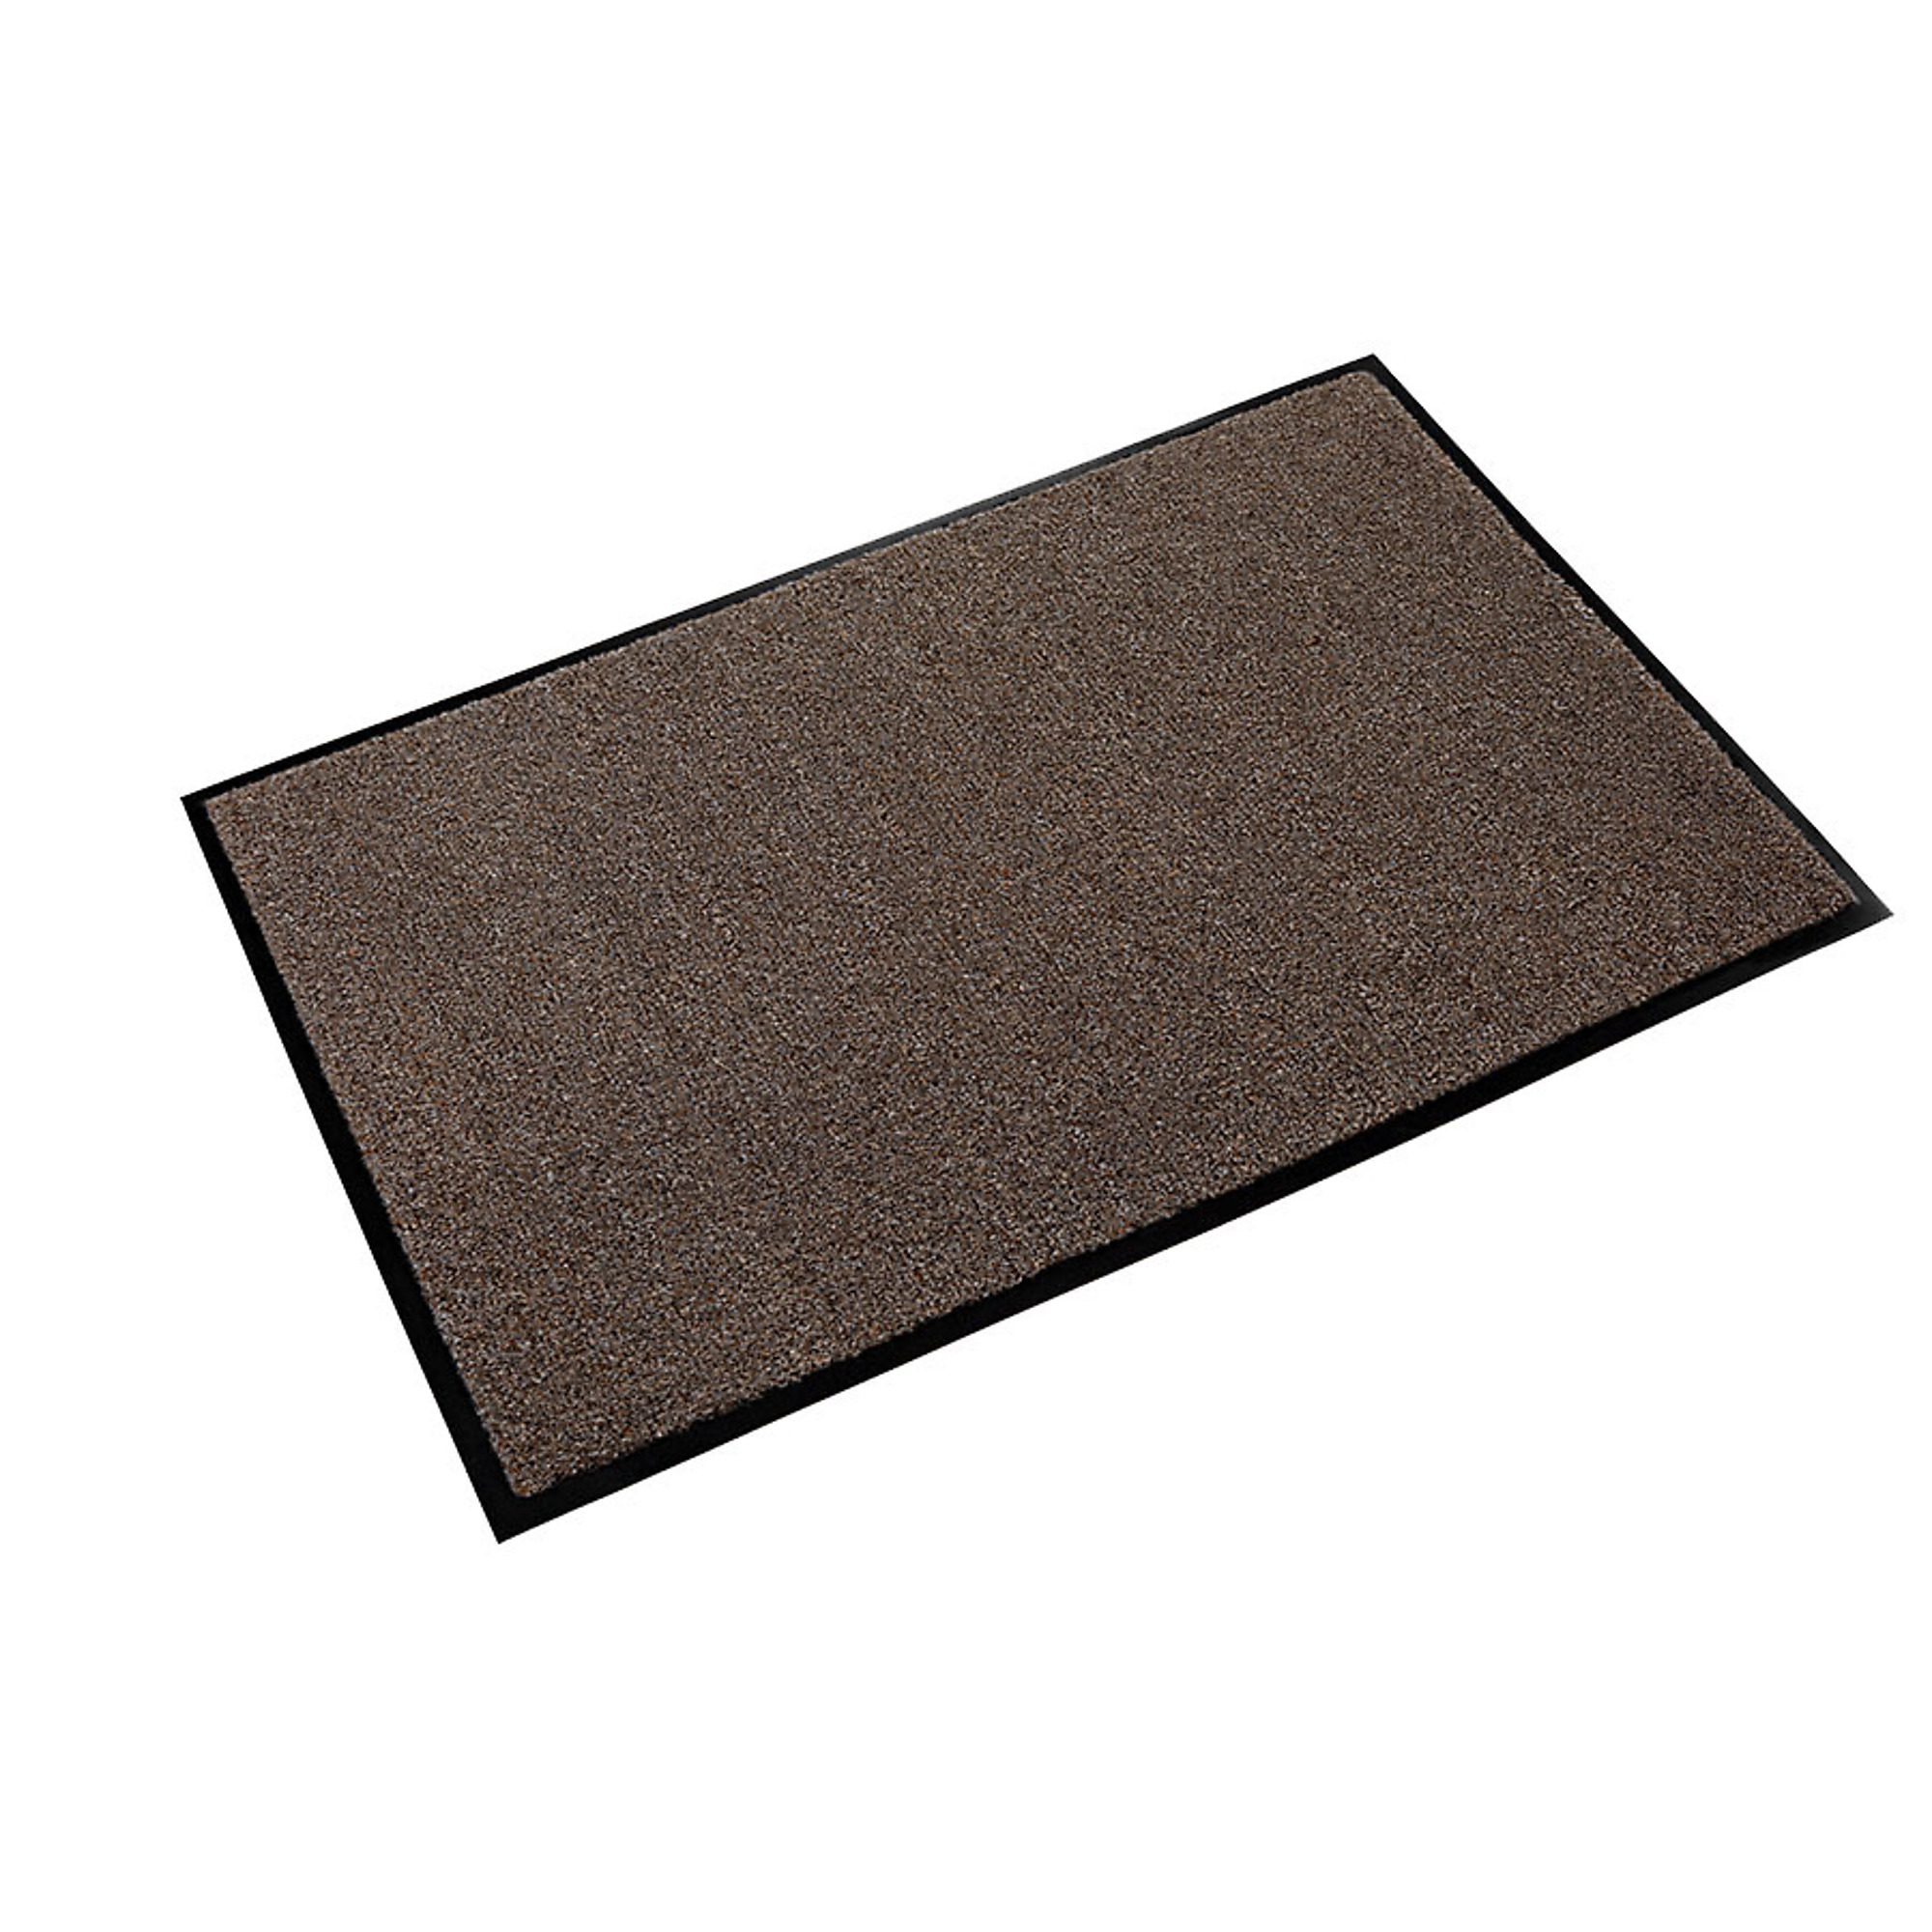 Crown Matting Technologies, Rely-On Olefin 3ft.x5ft. Walnut, Width 36 in, Length 60 in, Thickness 3/8 in, Model GS 0035WA